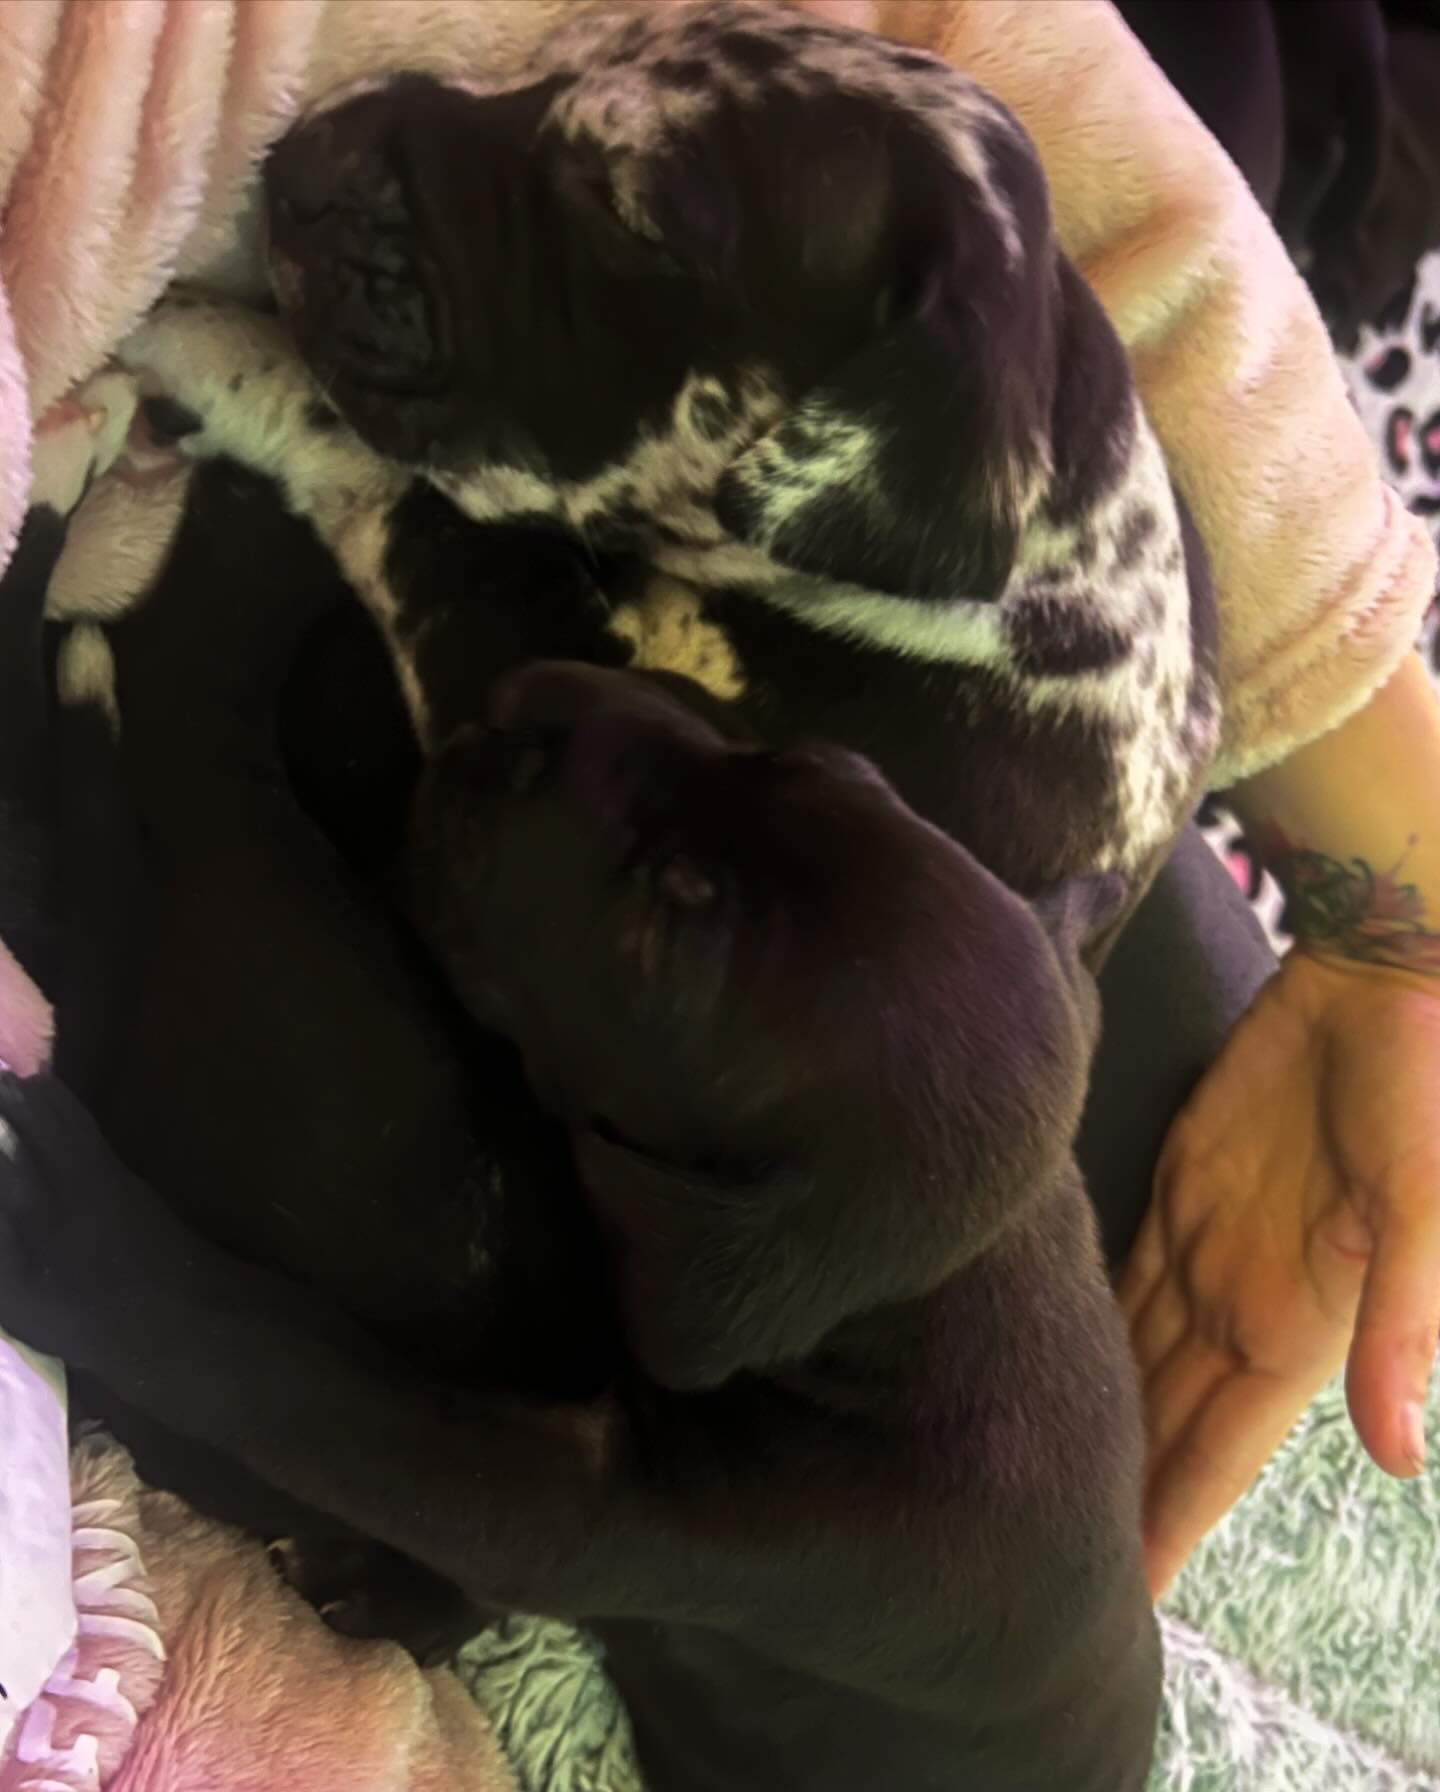 My dogs had some of the cutest puppies #danes #greatdanes #greatdanesofinstagram #3weeksoldpuppies